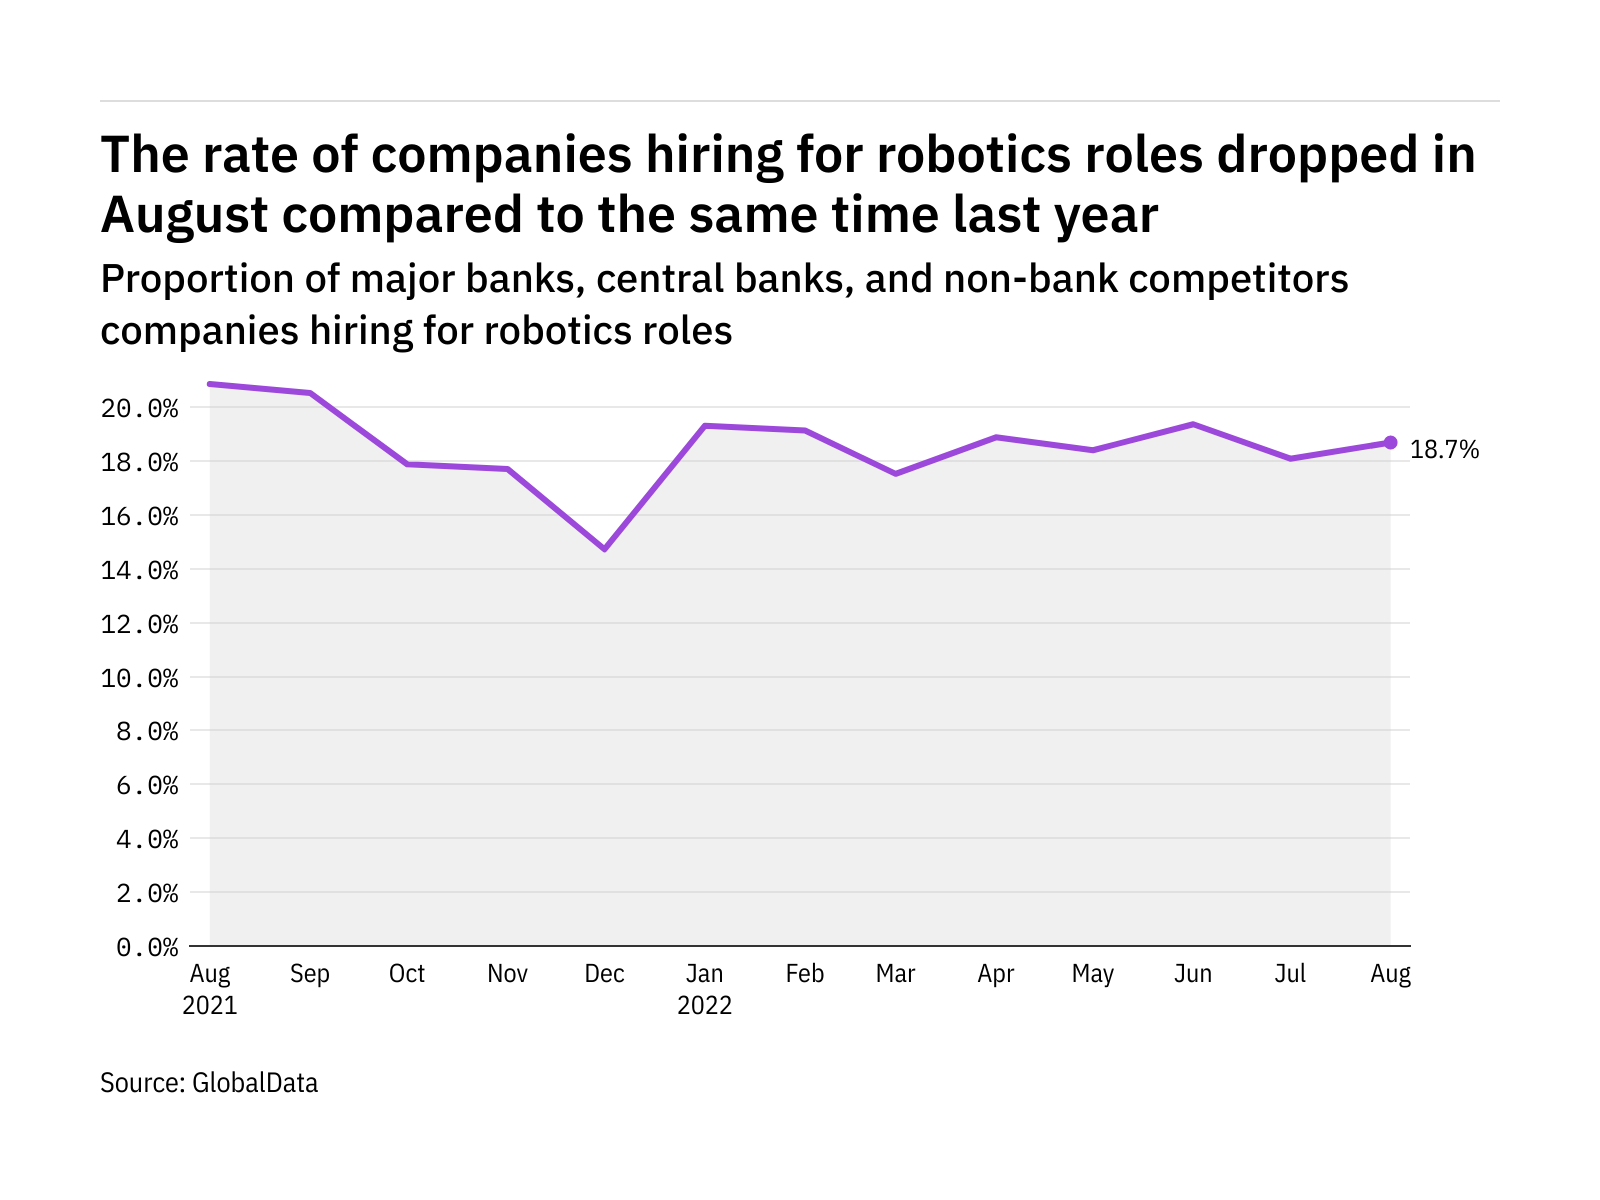 Robotics hiring levels in the retail banking industry dropped in August 2022